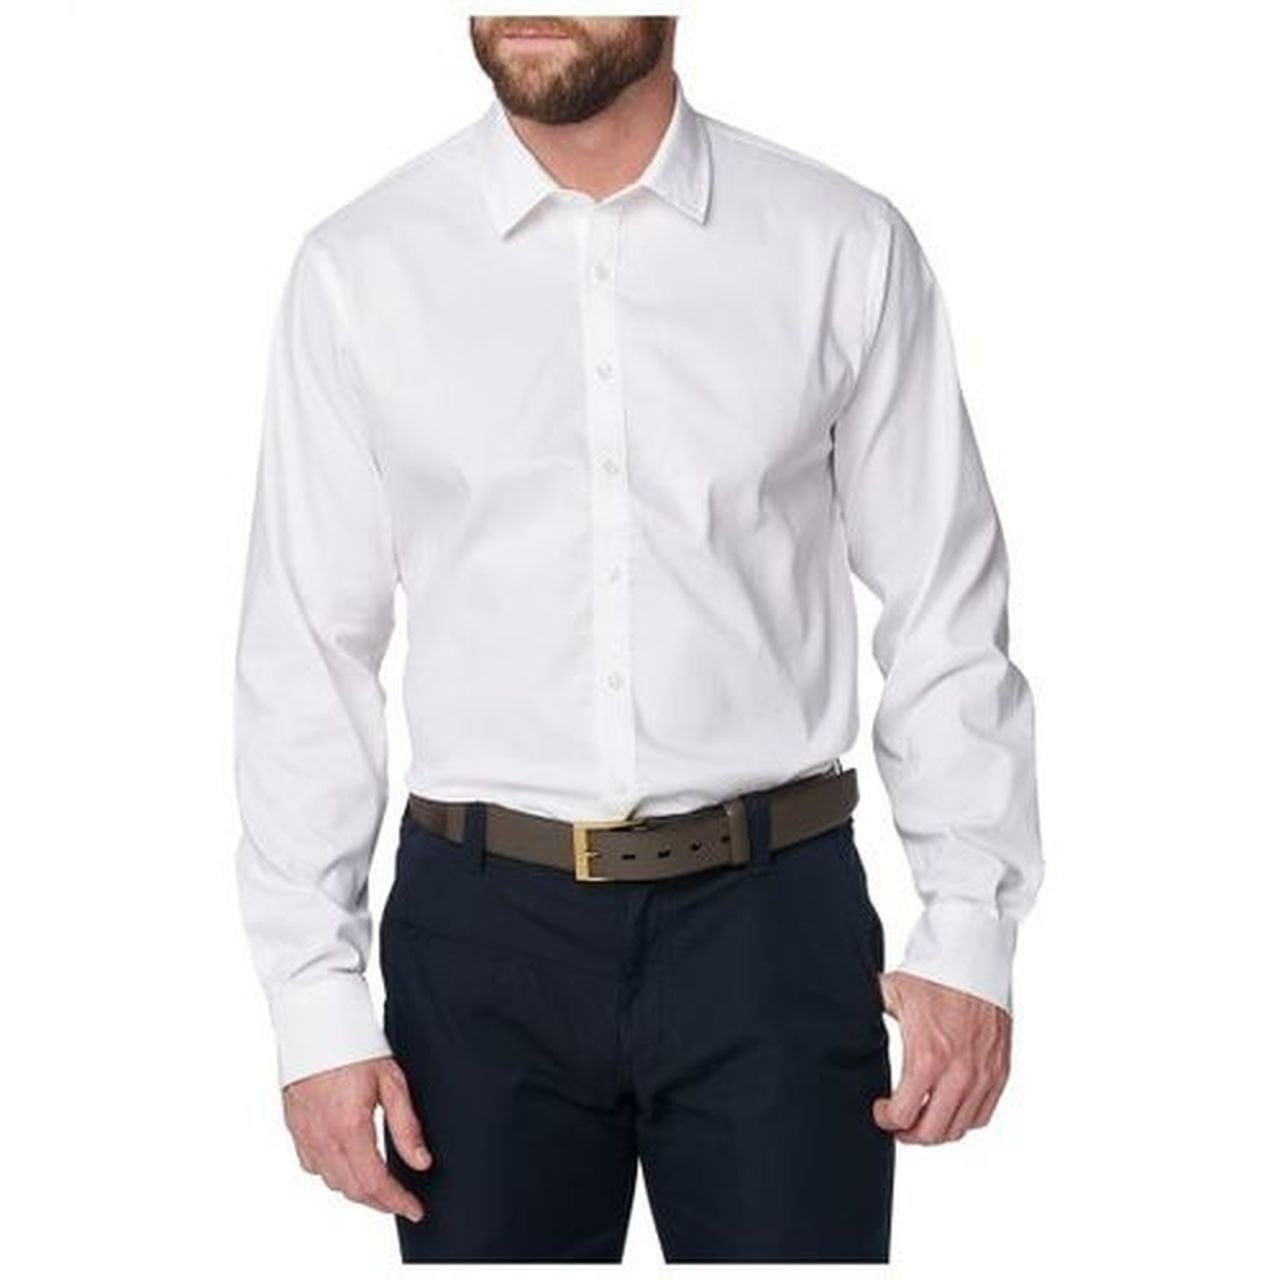 5.11 Tactical - 5.11 Tactical Men's Mission Ready Fitted Dress Shirt ...